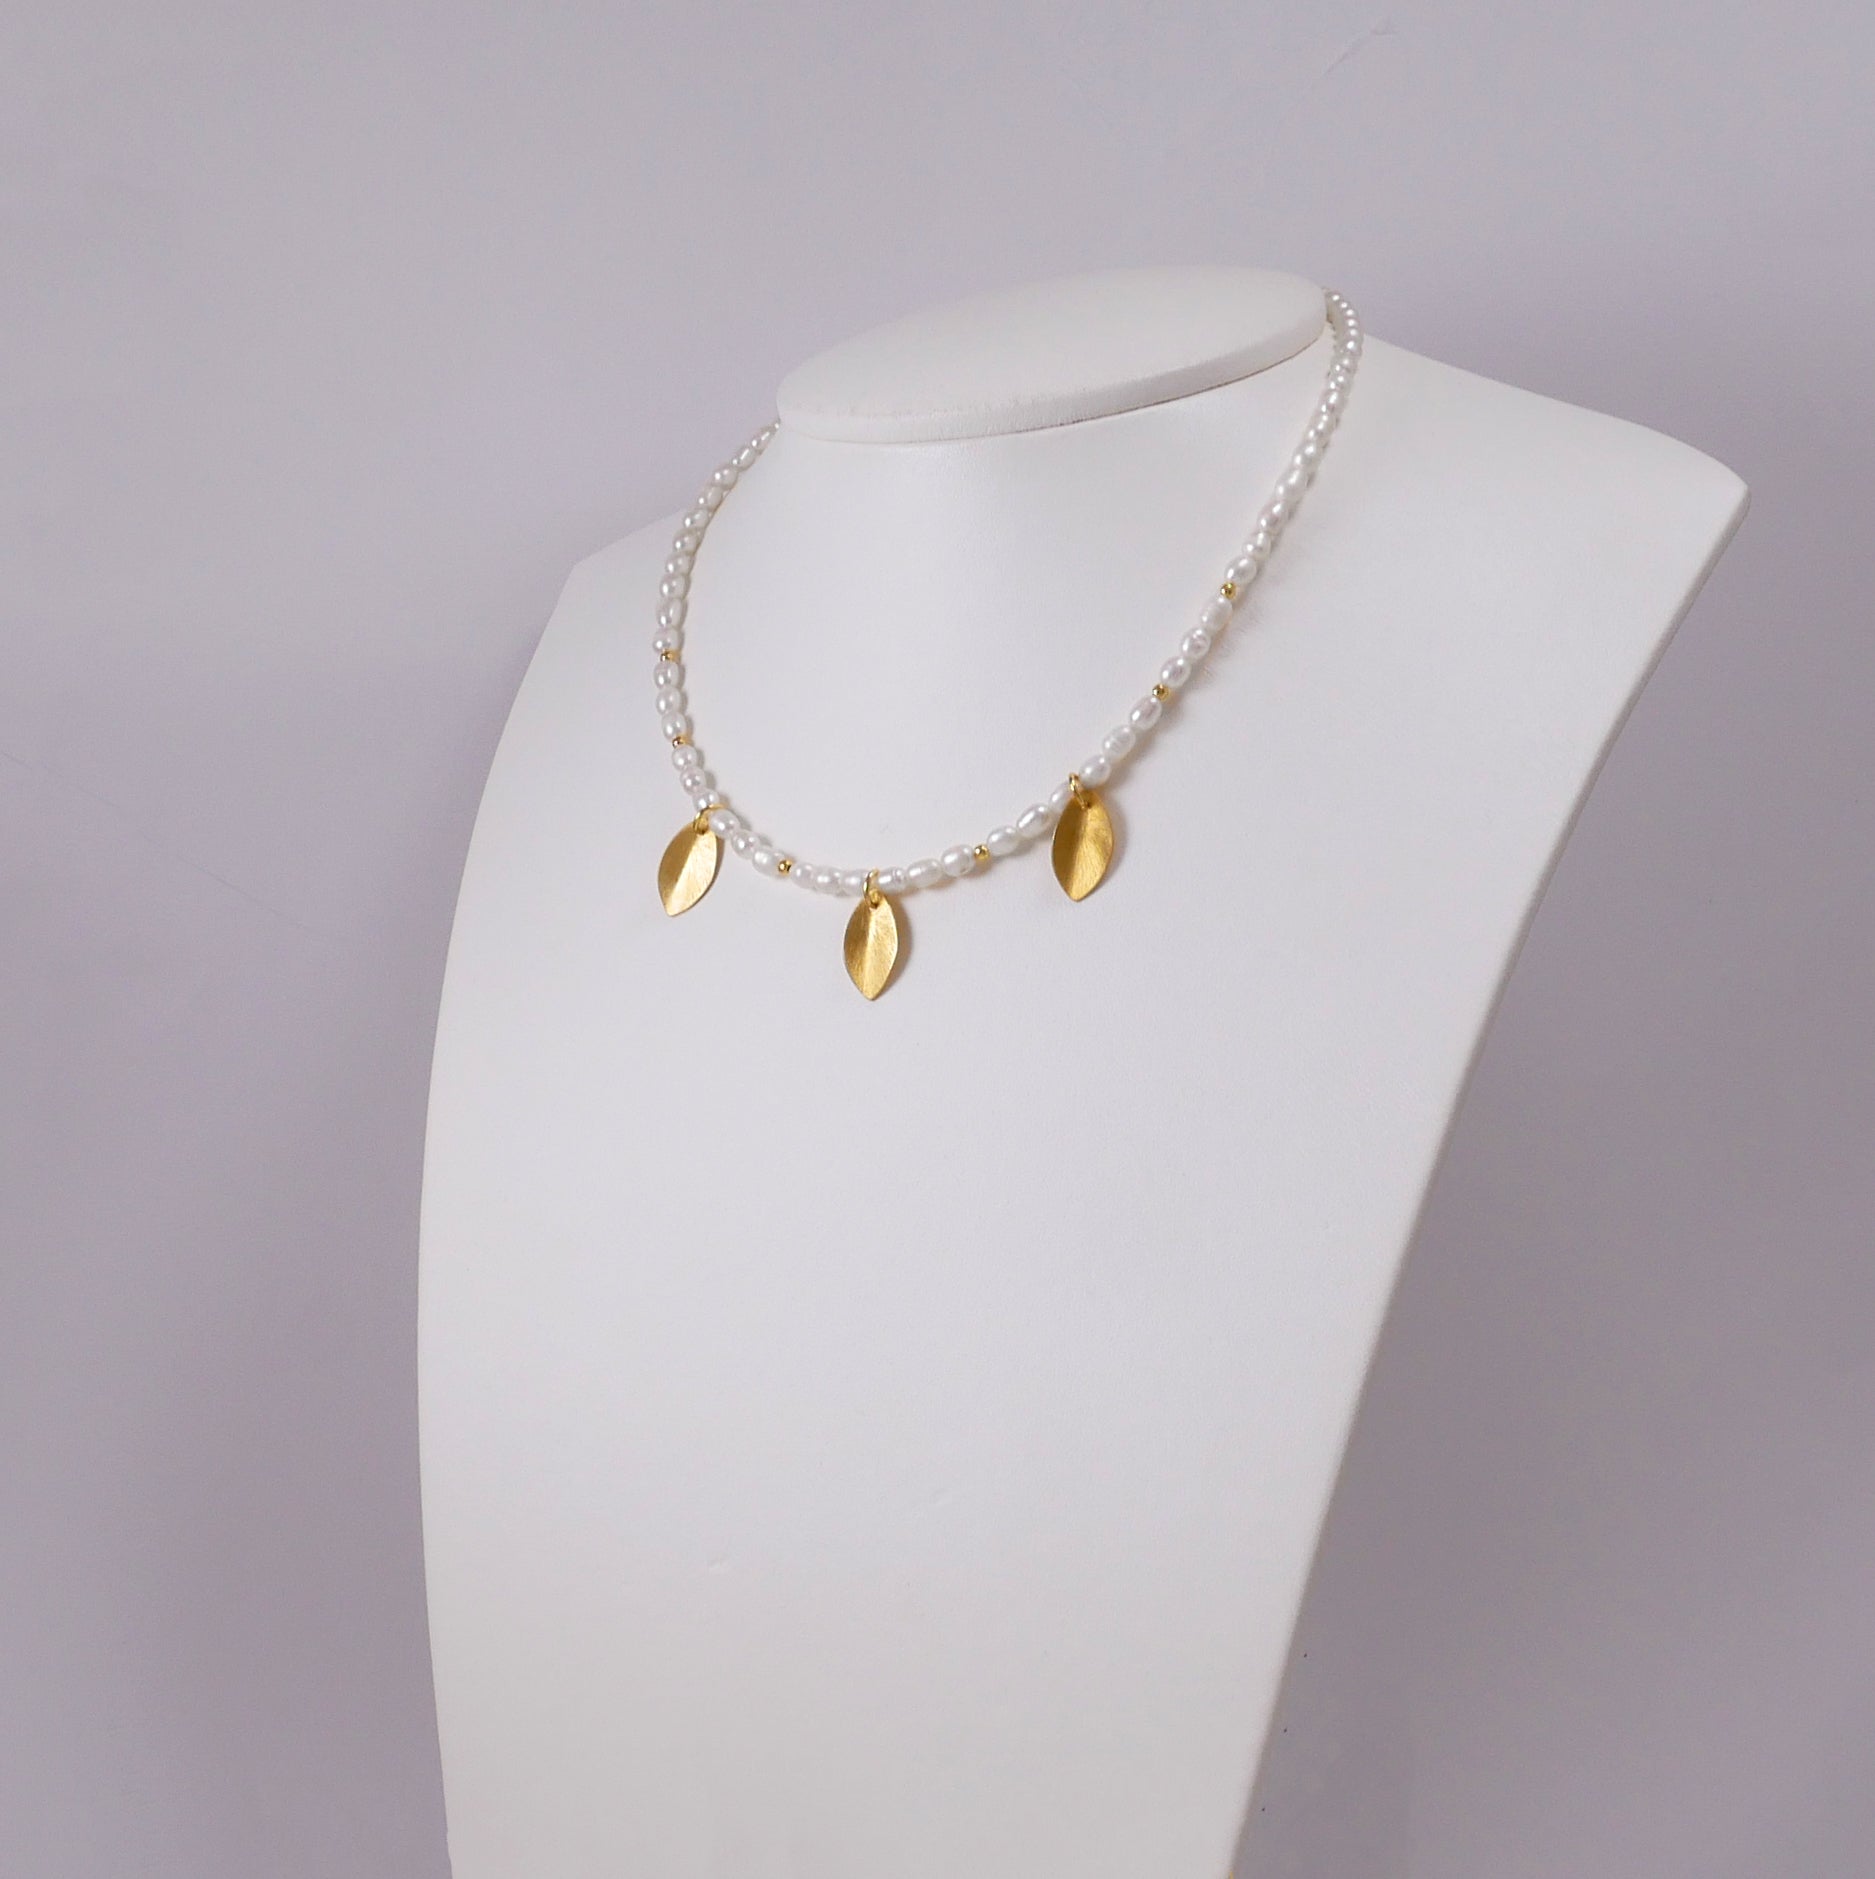 Pearls and Gold Plated Sterling Silver Leaves Necklace - Katerina Roukouna